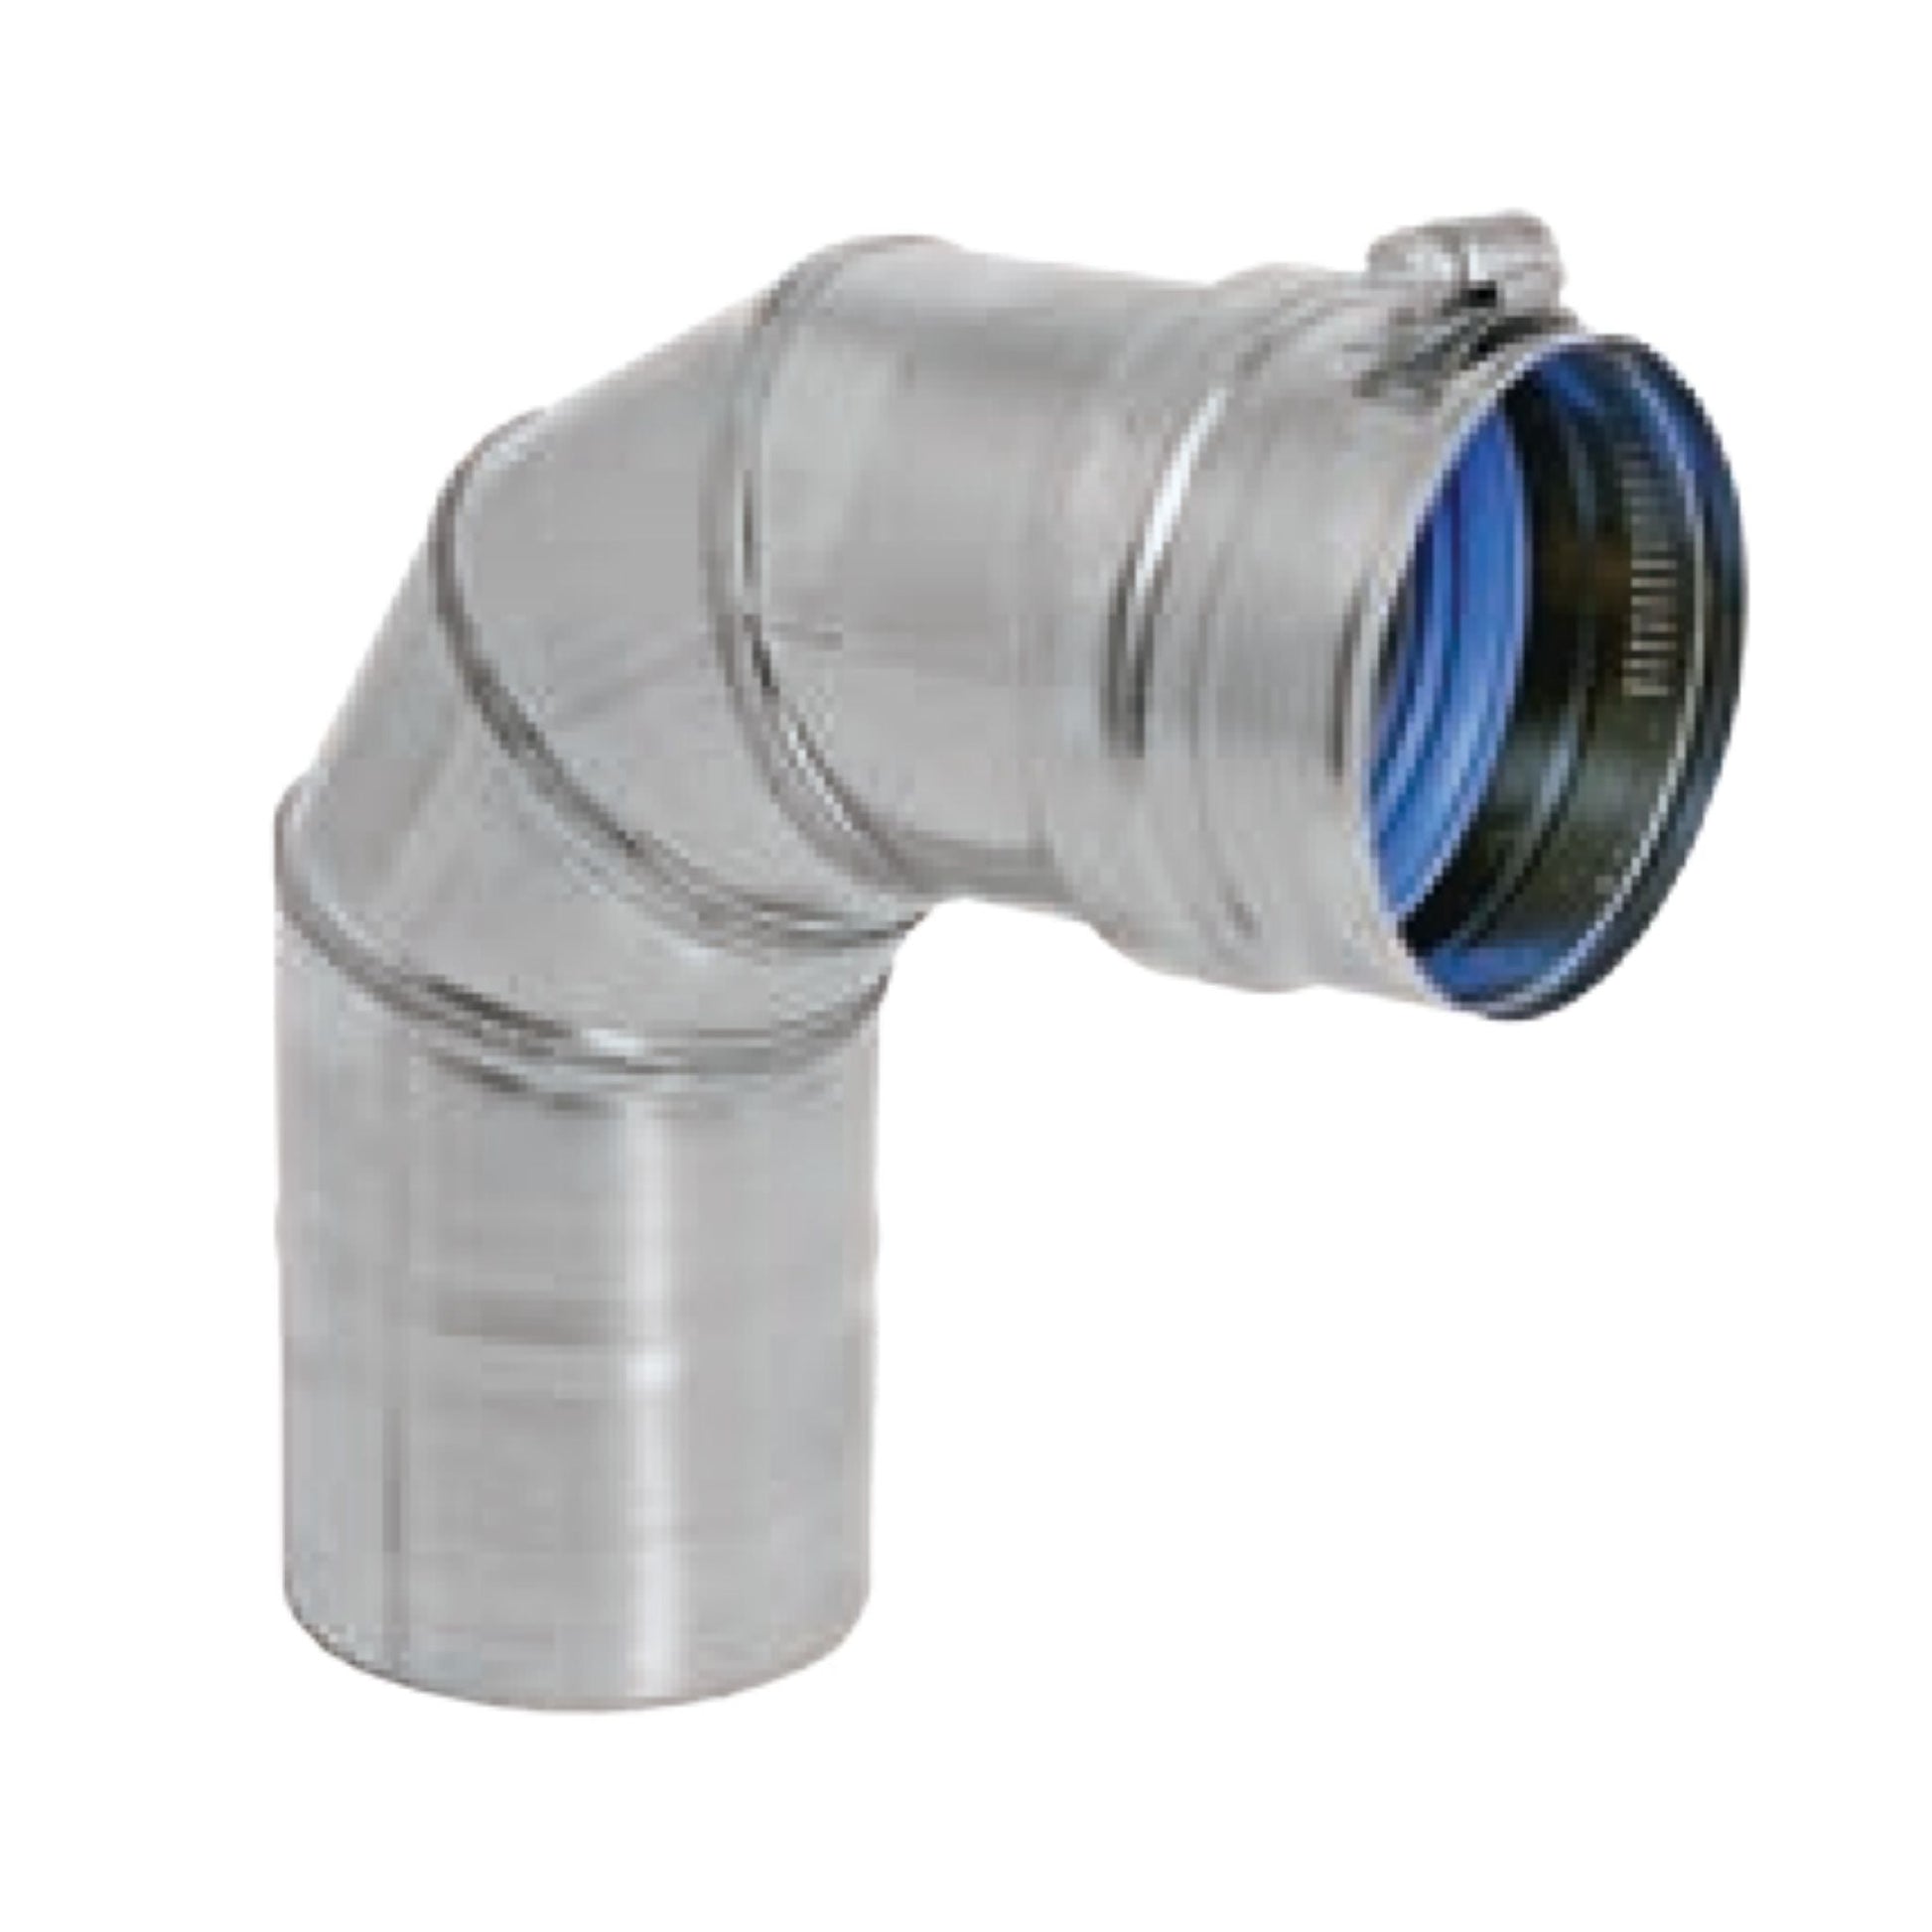 DuraVent FasNSeal 3" 90 Degree 316L Stainless Steel Elbow